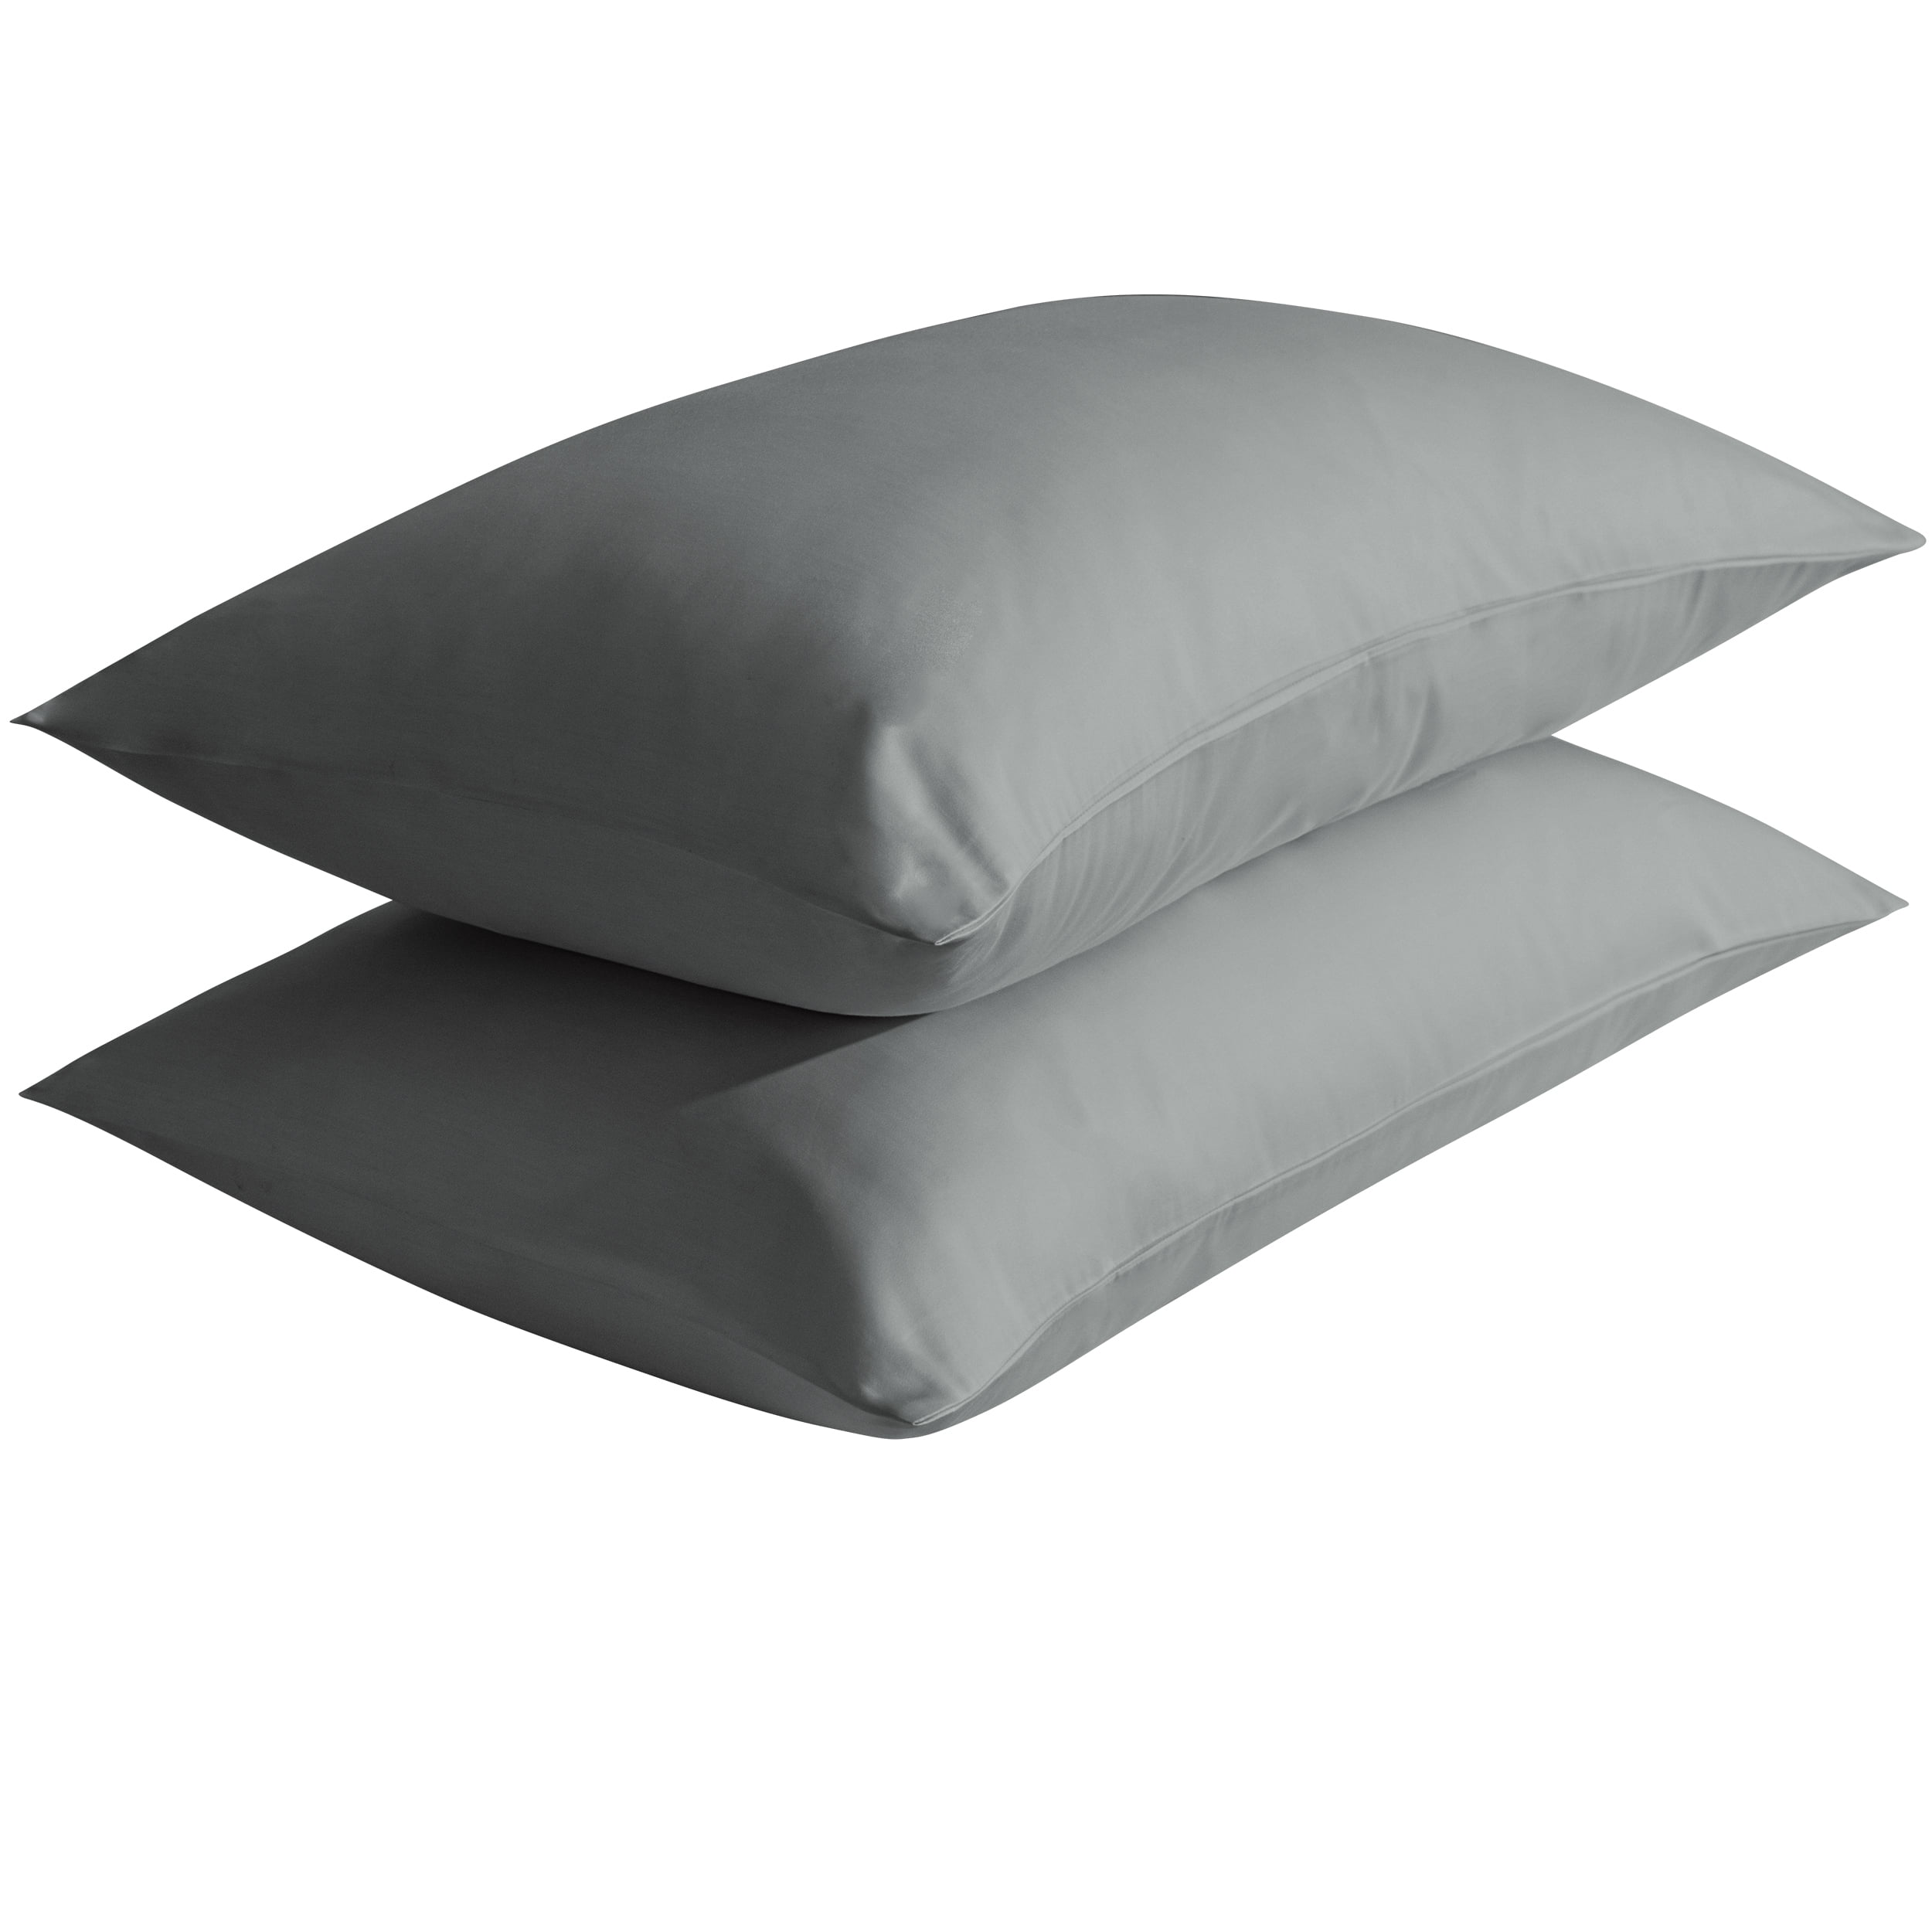 Details about   Soft Pillowcase Breathable Comfort Smooth Accessories Tool 100% Envelope 